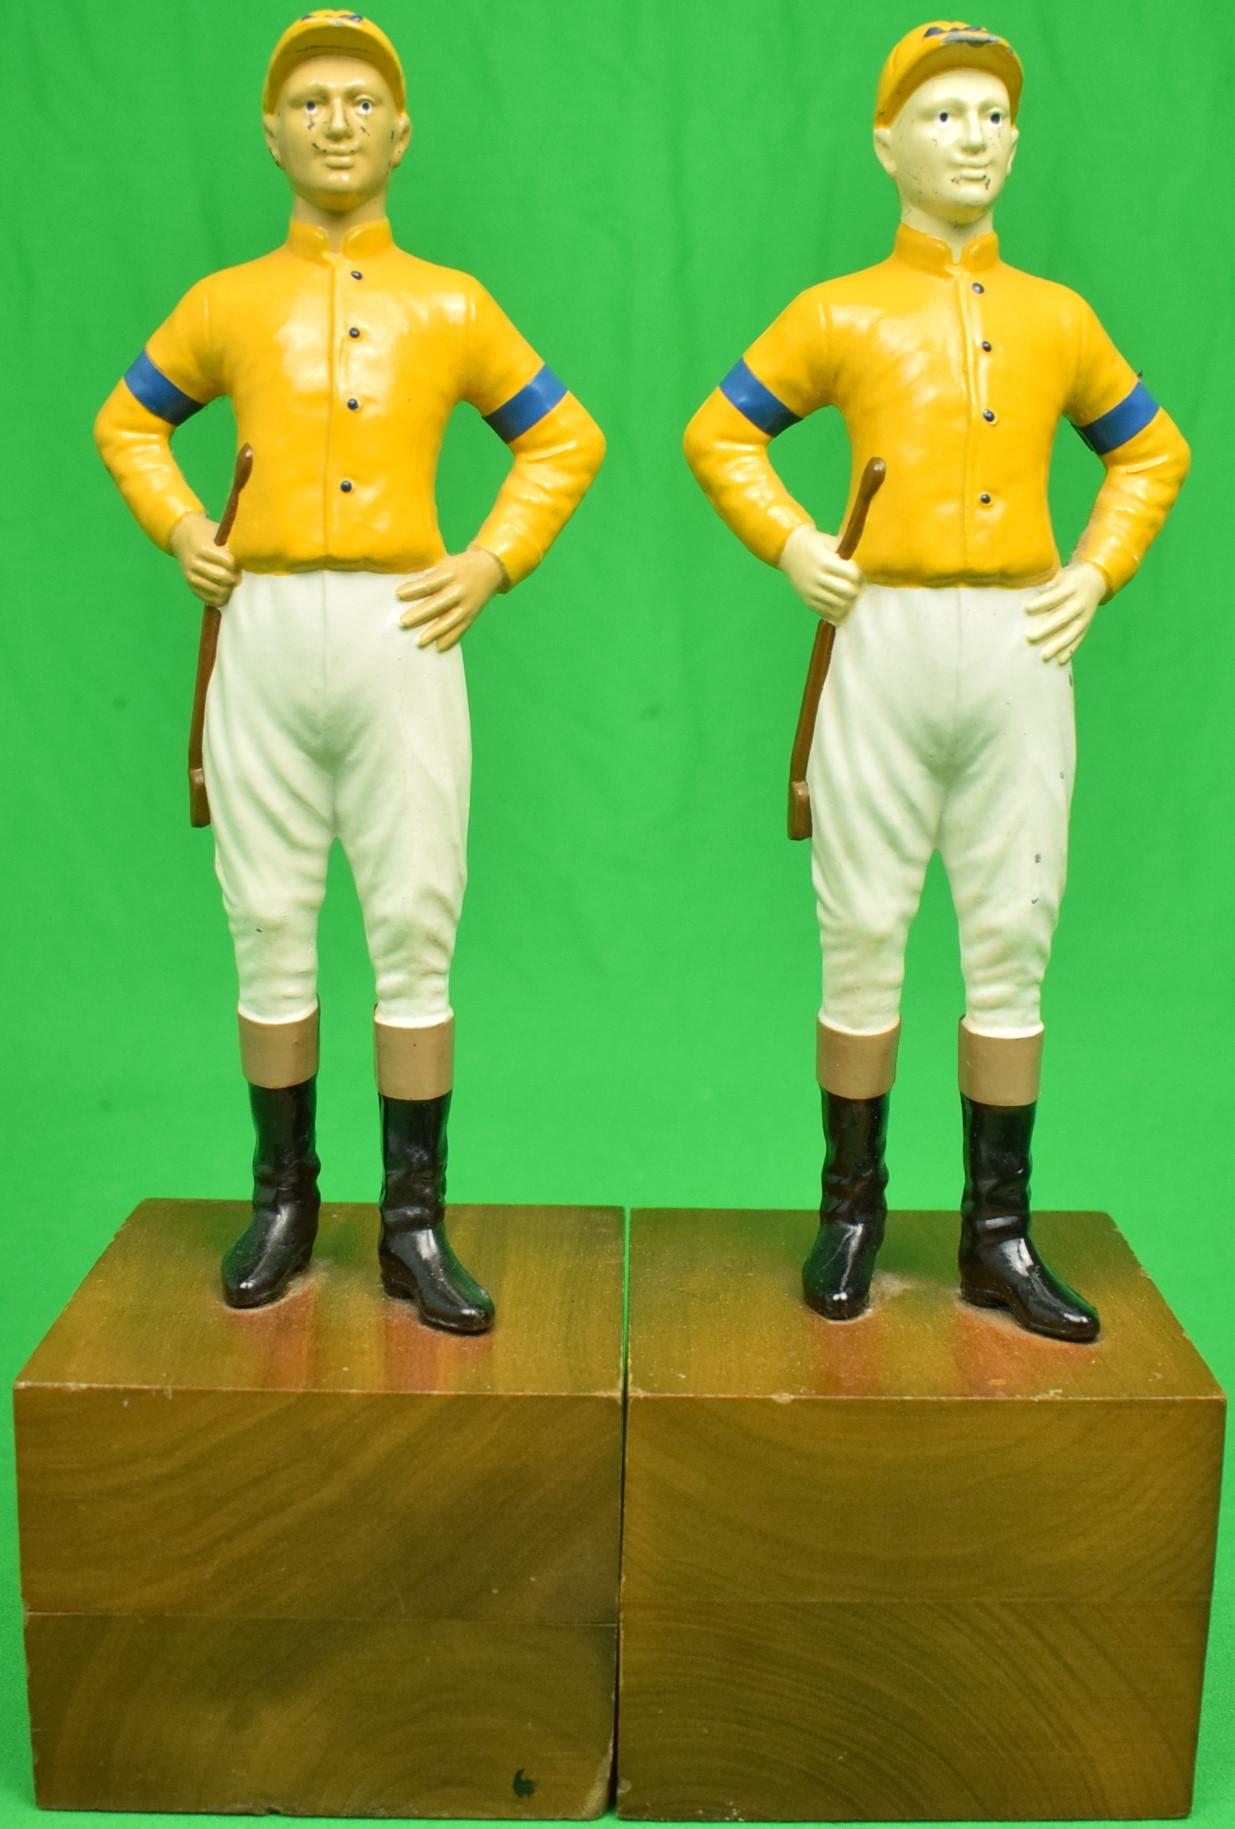 Pair of "21" Club New York Jockey Bookends - Art by Unknown